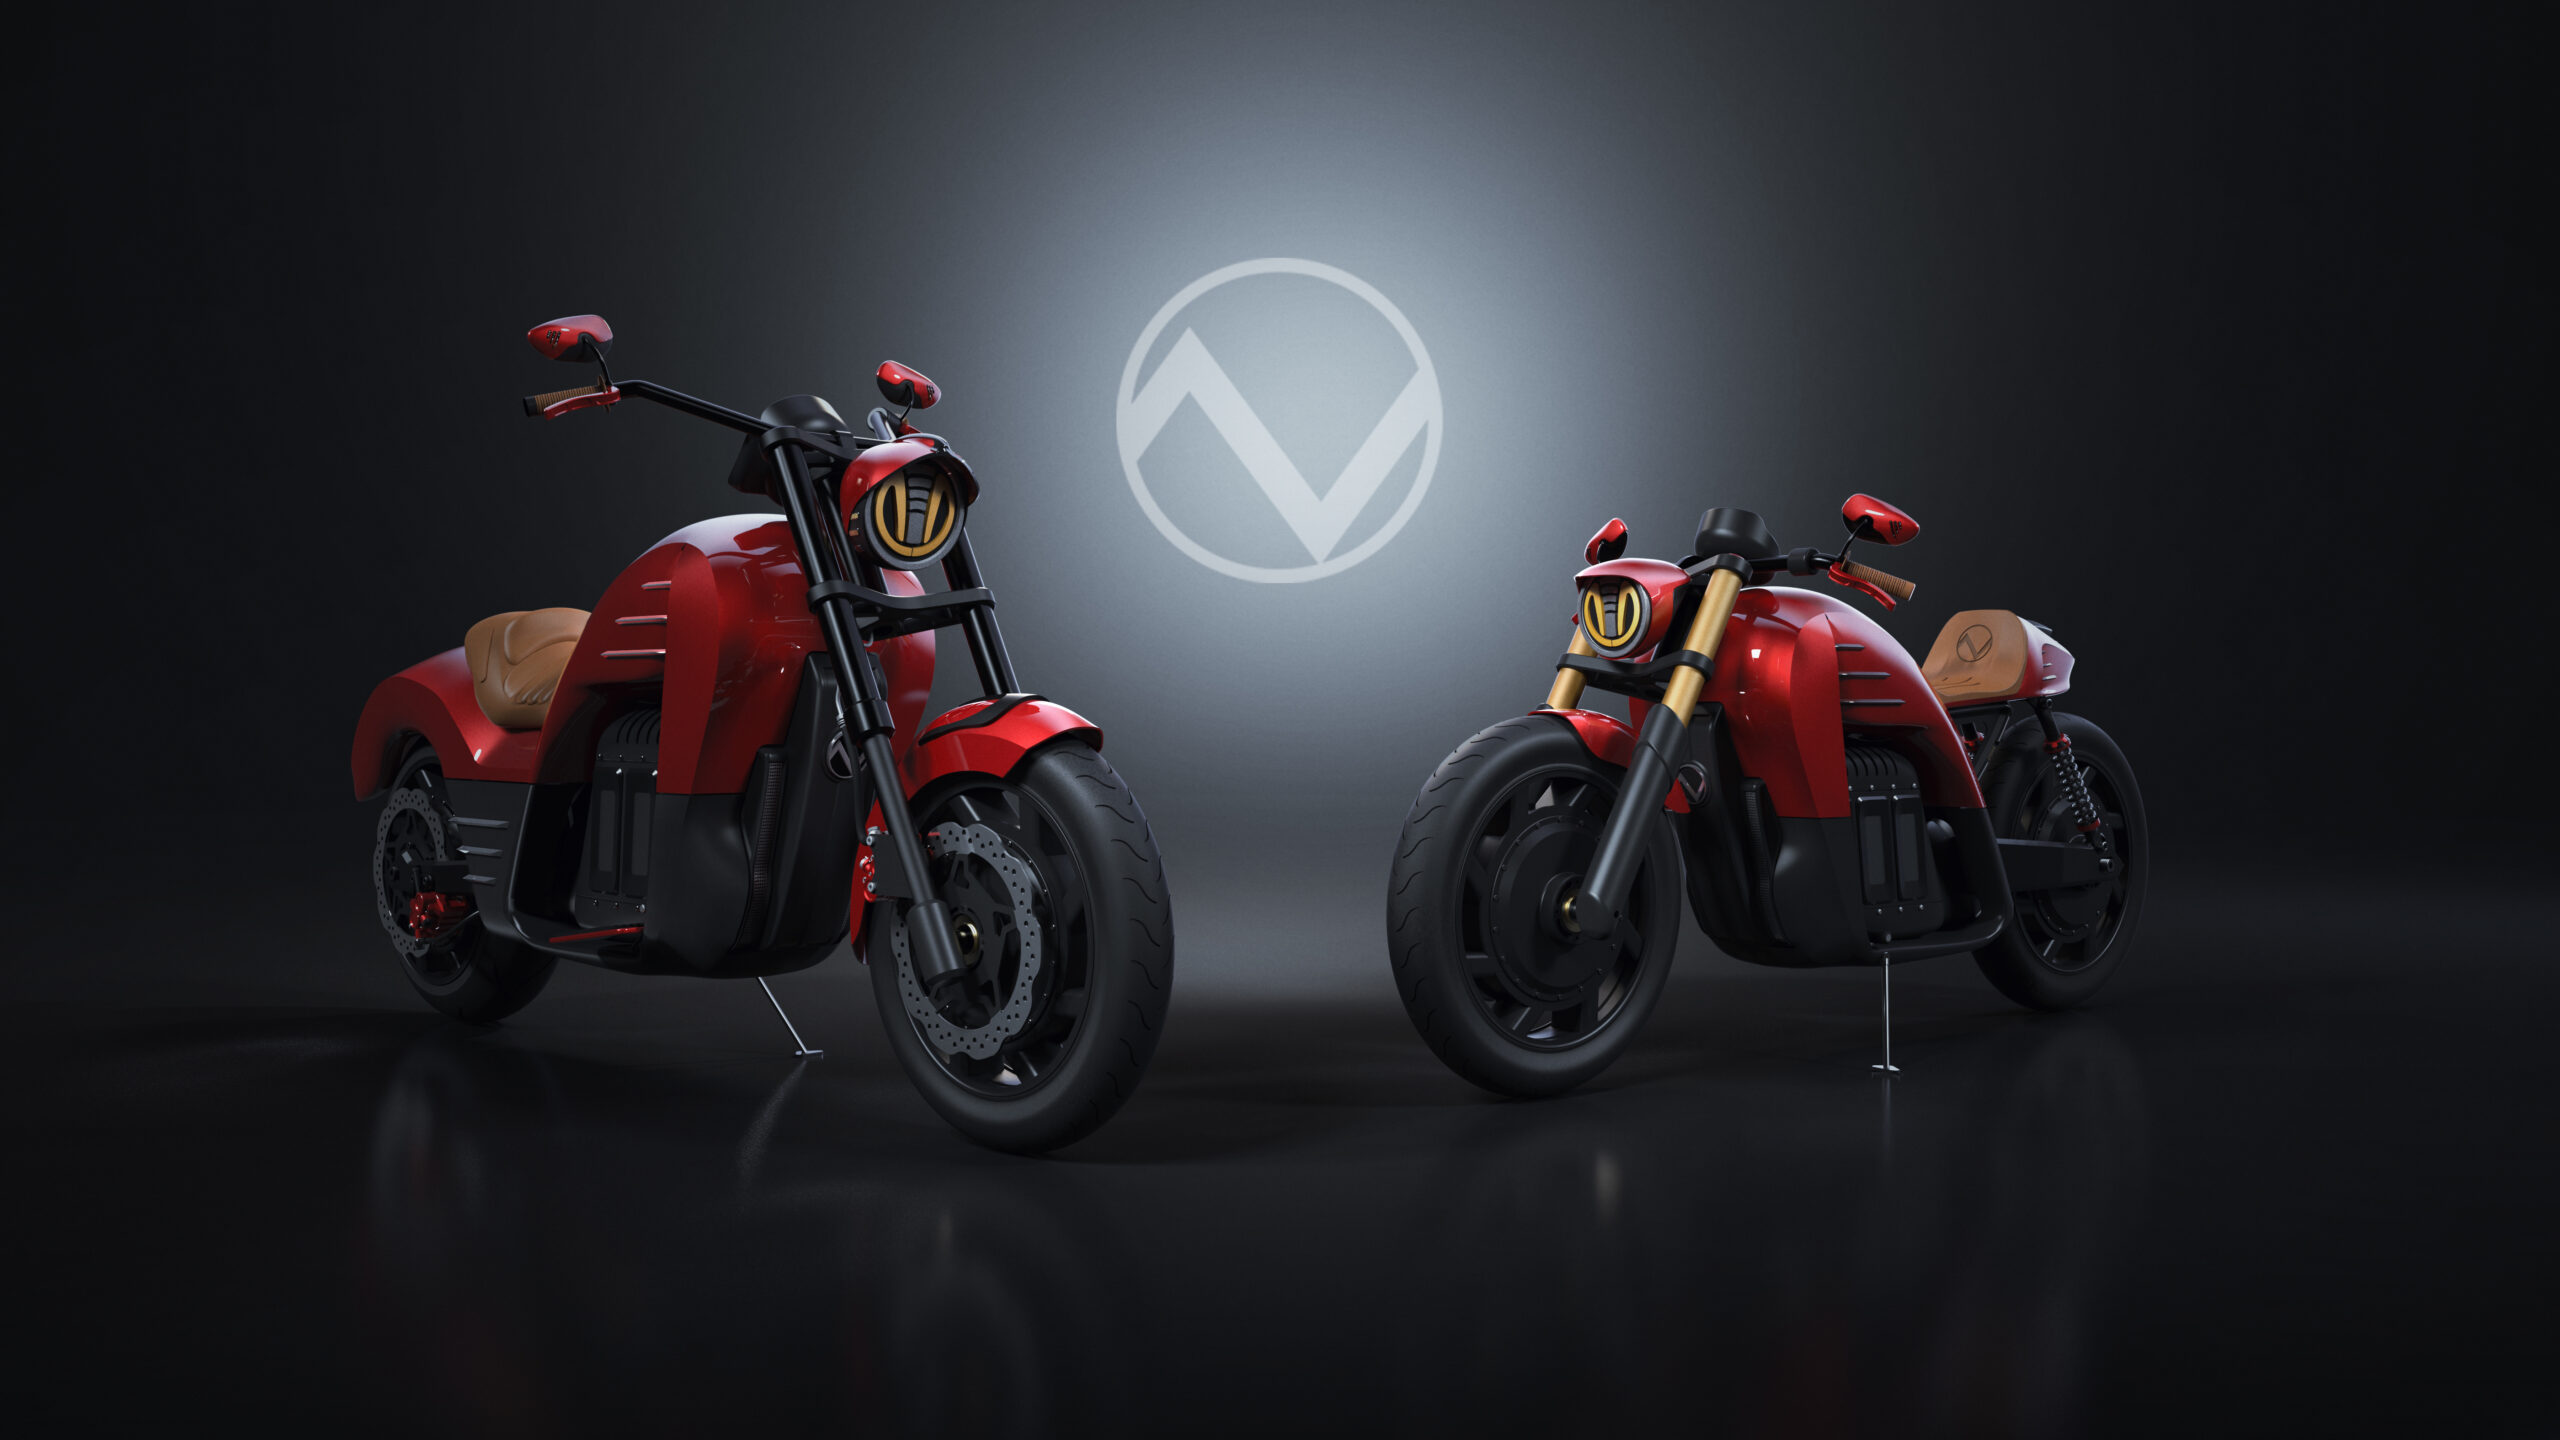 Anthony Cross’ Love of Sustainable Innovation Gives a Fresh New Look at Electric Motorcycles